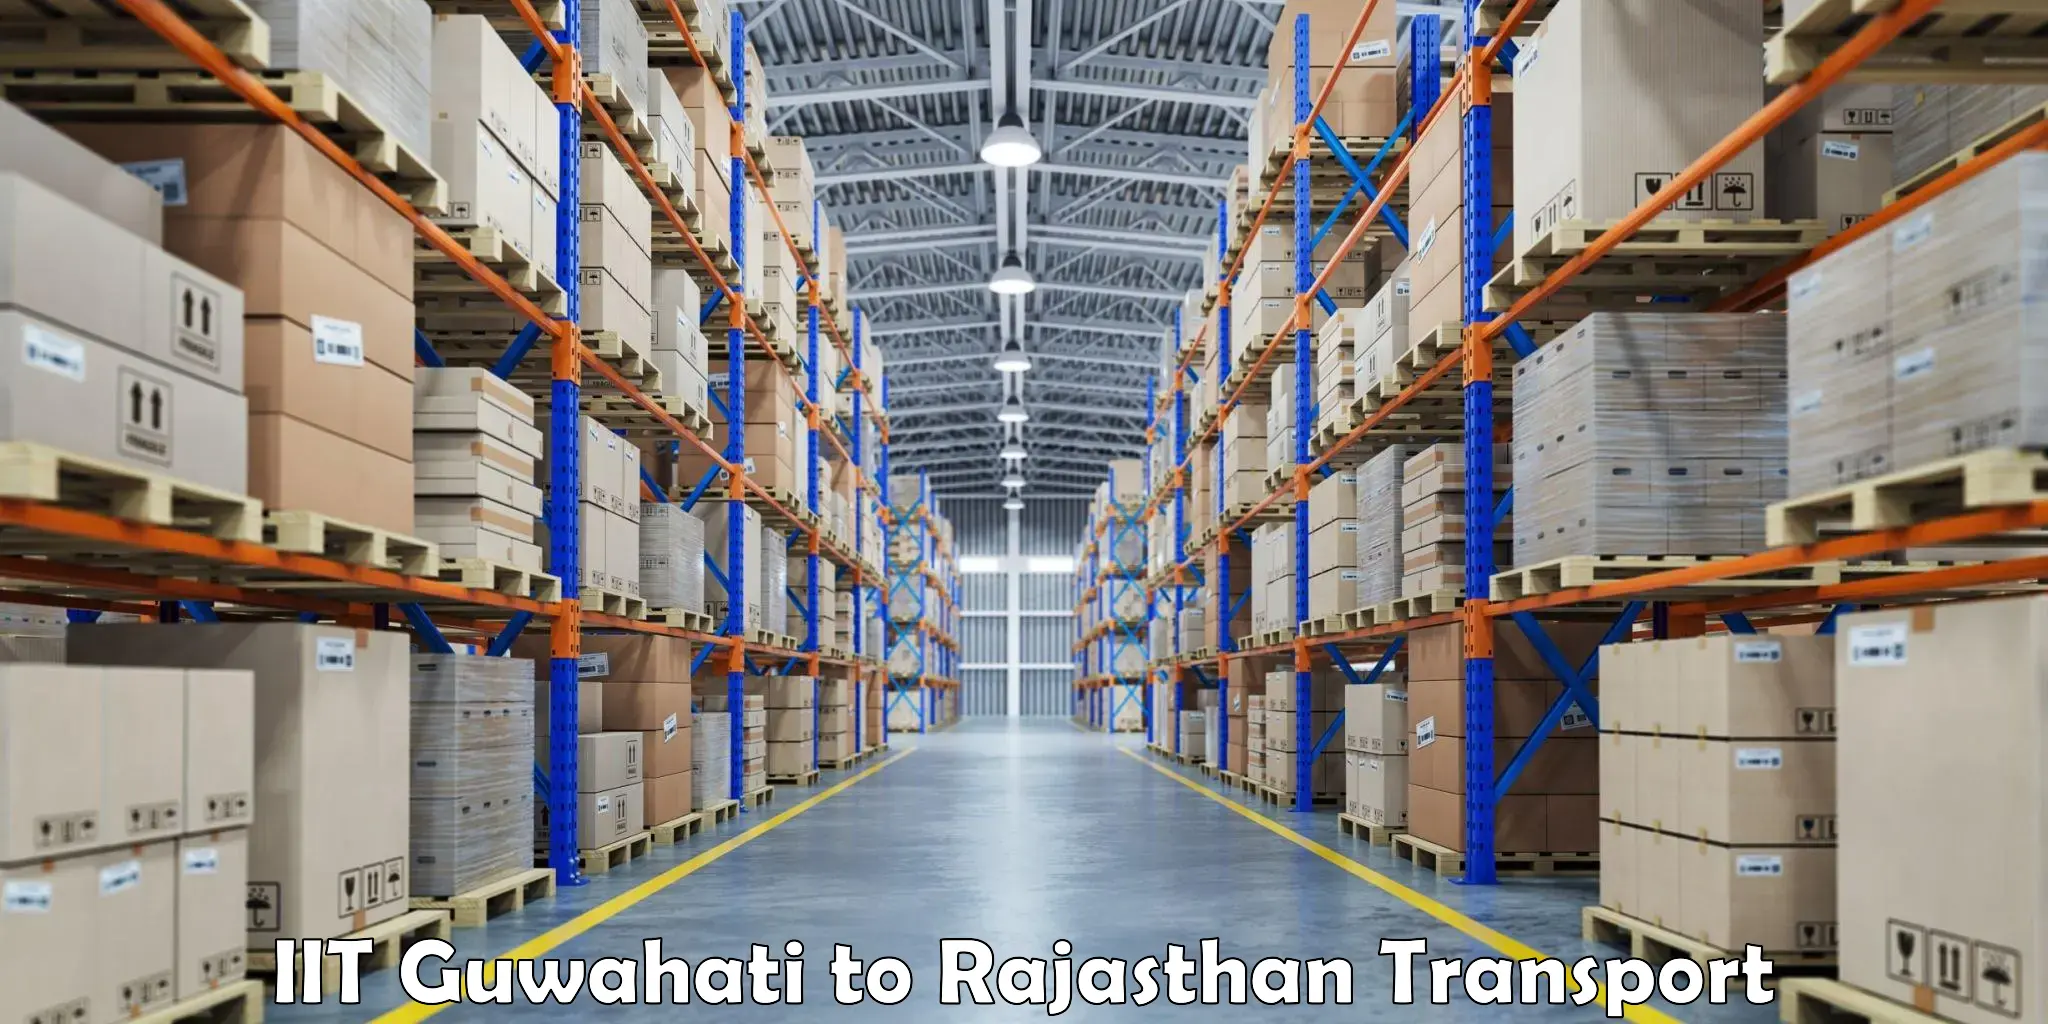 Road transport online services IIT Guwahati to Sikar